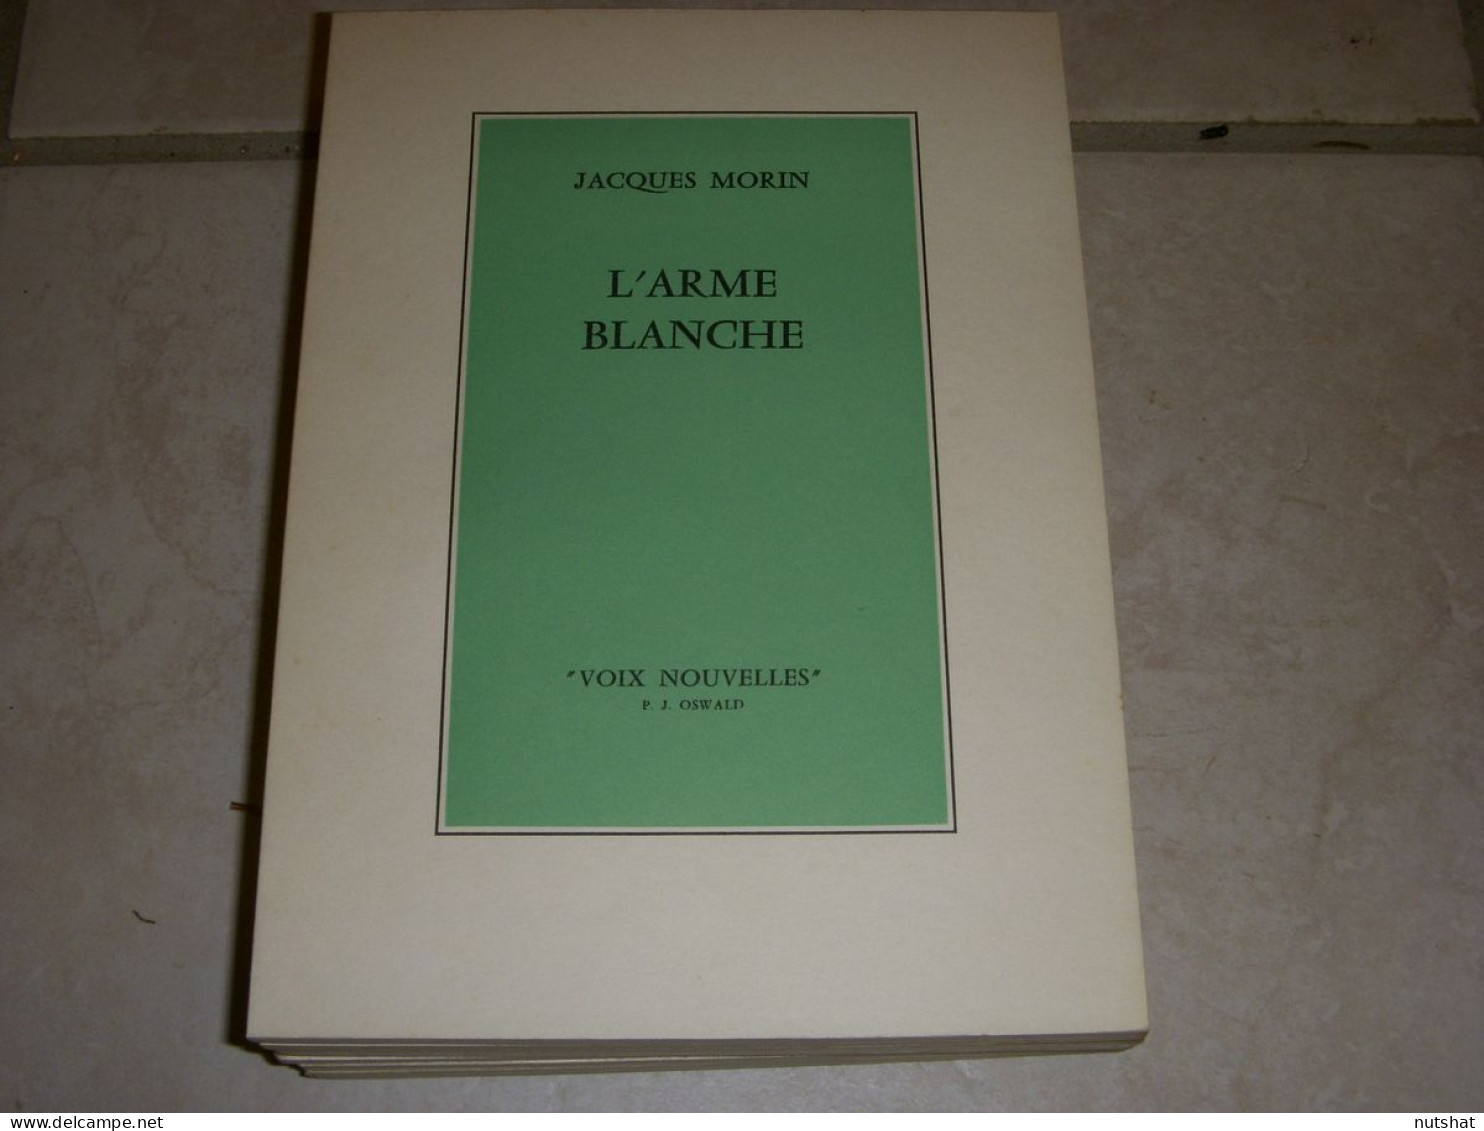 LIVRE POEMES Jacques MORIN L'ARME BLANCHE Ed Pierre Jean OSWALD 1970 50p. - French Authors